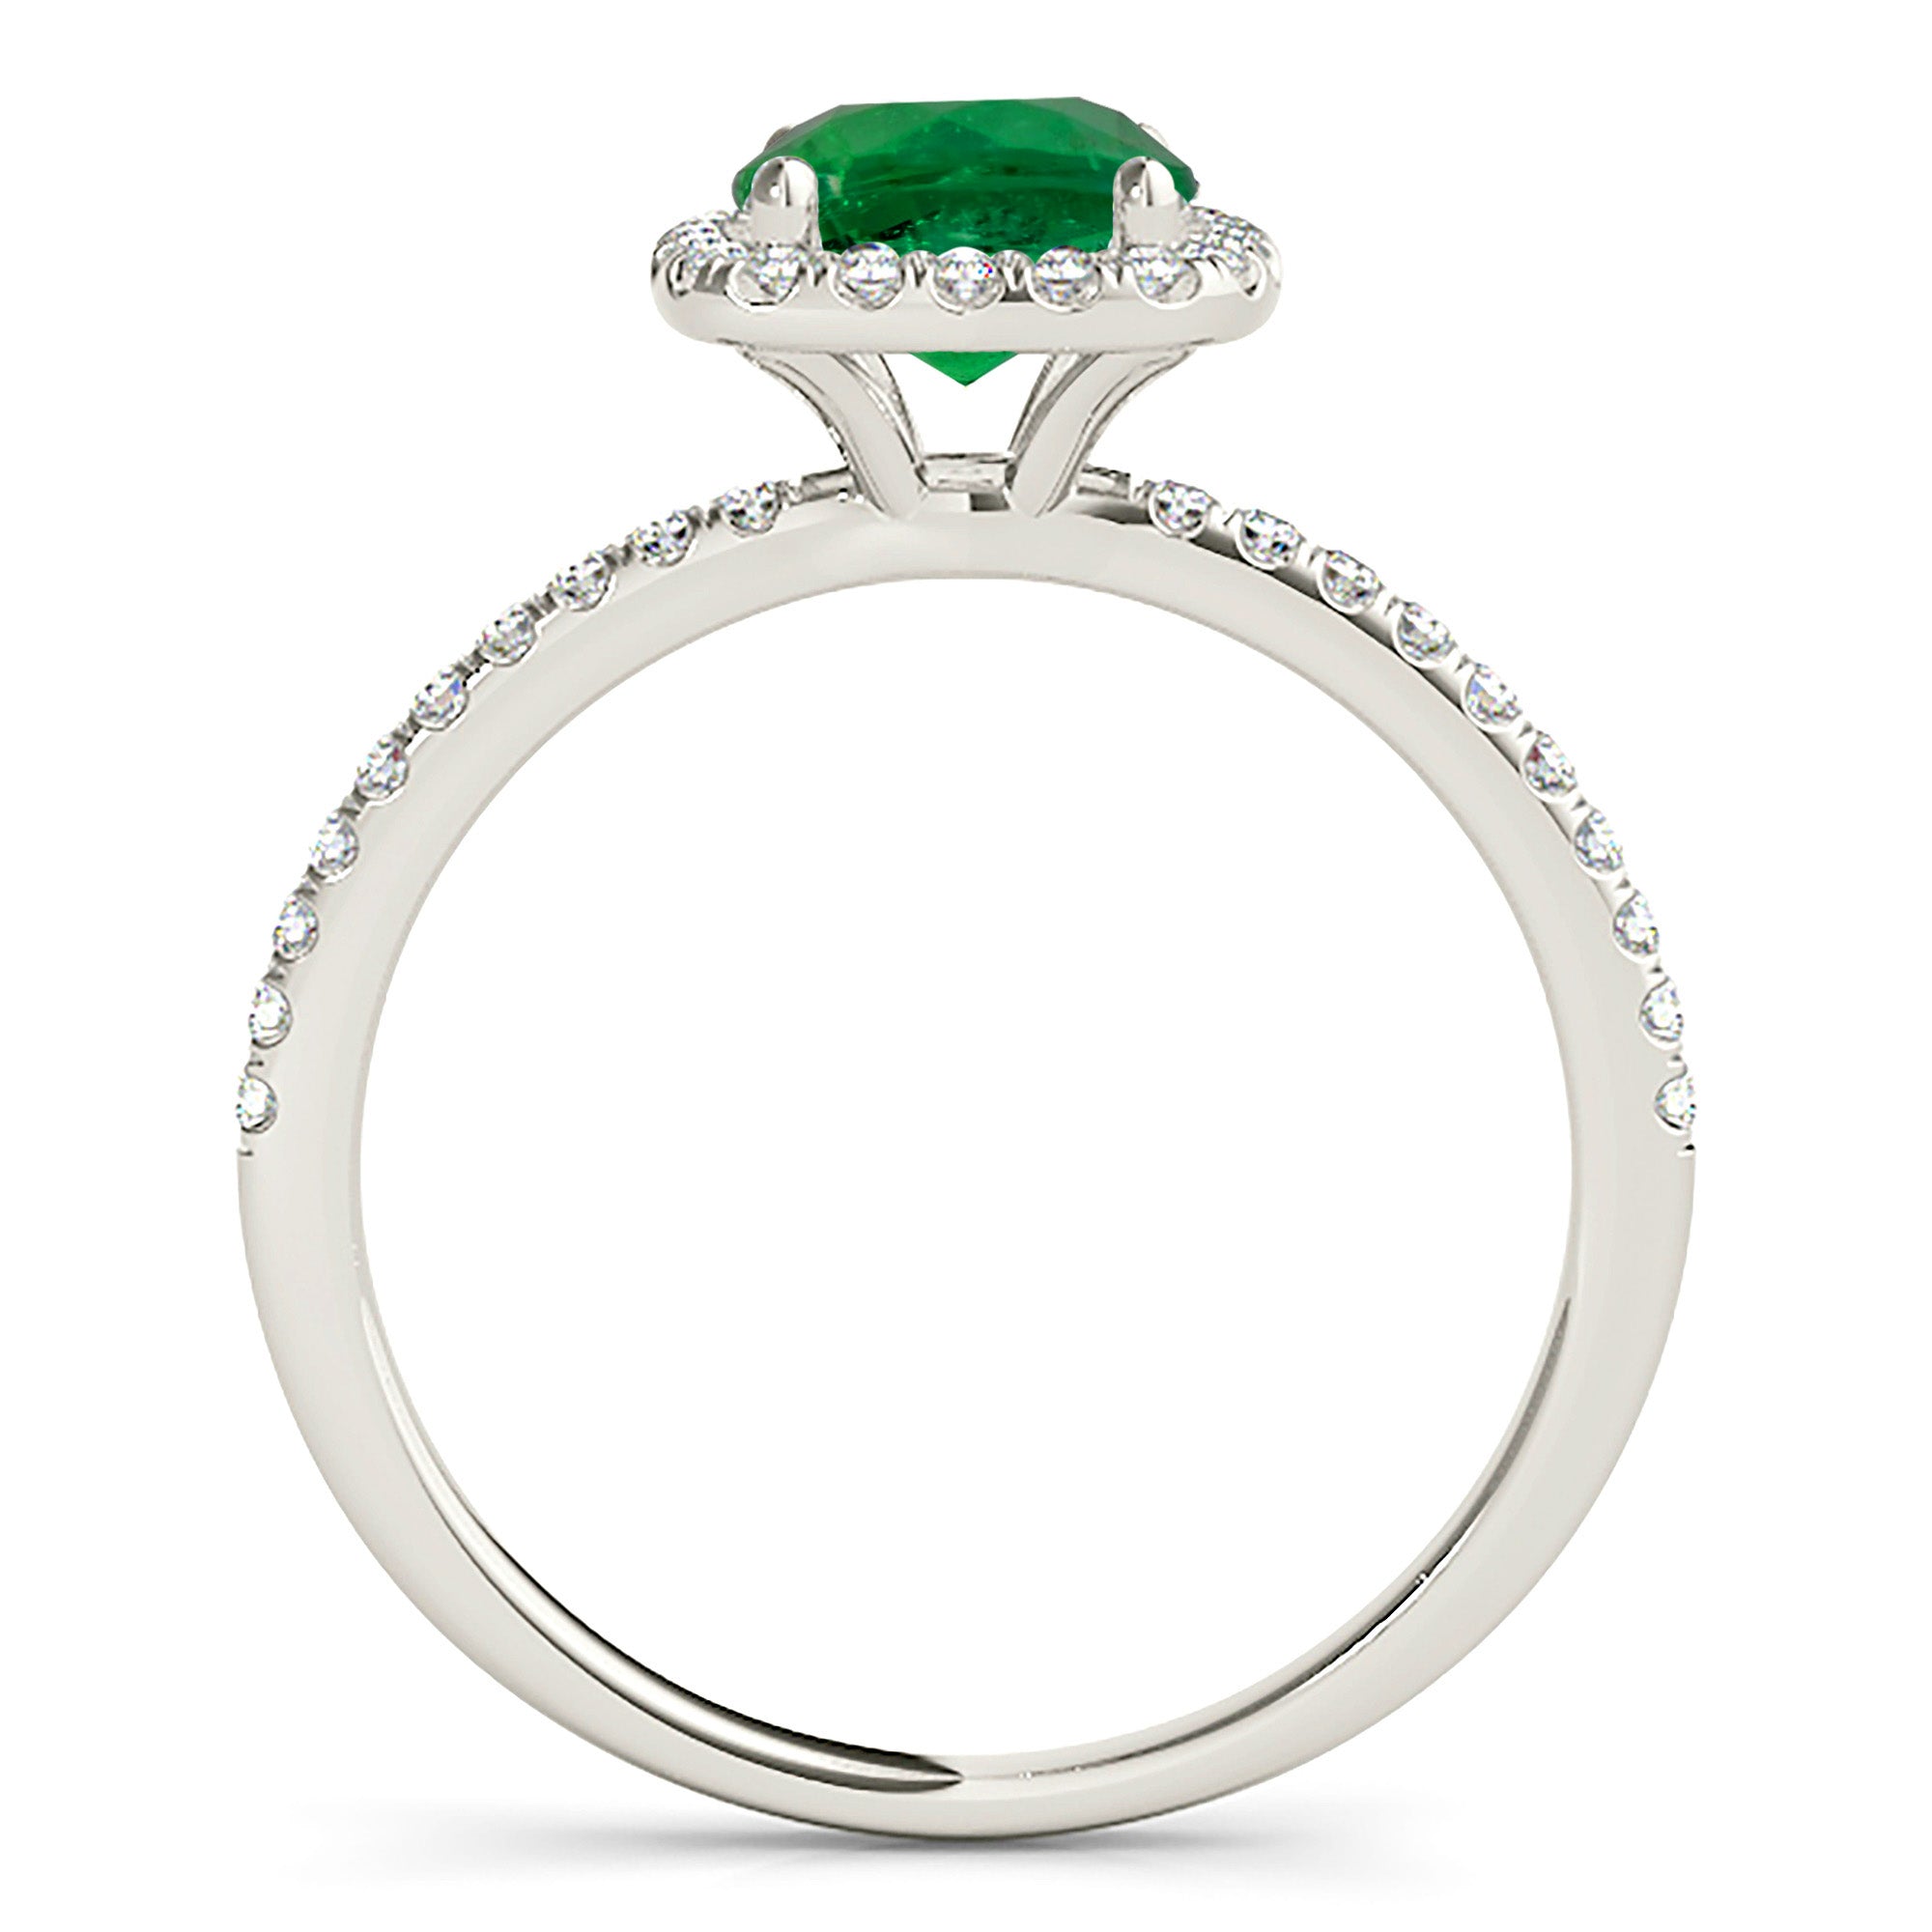 1.14 ct. Genuine Emerald Ring With 0.20 ctw. Diamond Halo And Delicate Diamond band-in 14K/18K White, Yellow, Rose Gold and Platinum - Christmas Jewelry Gift -VIRABYANI